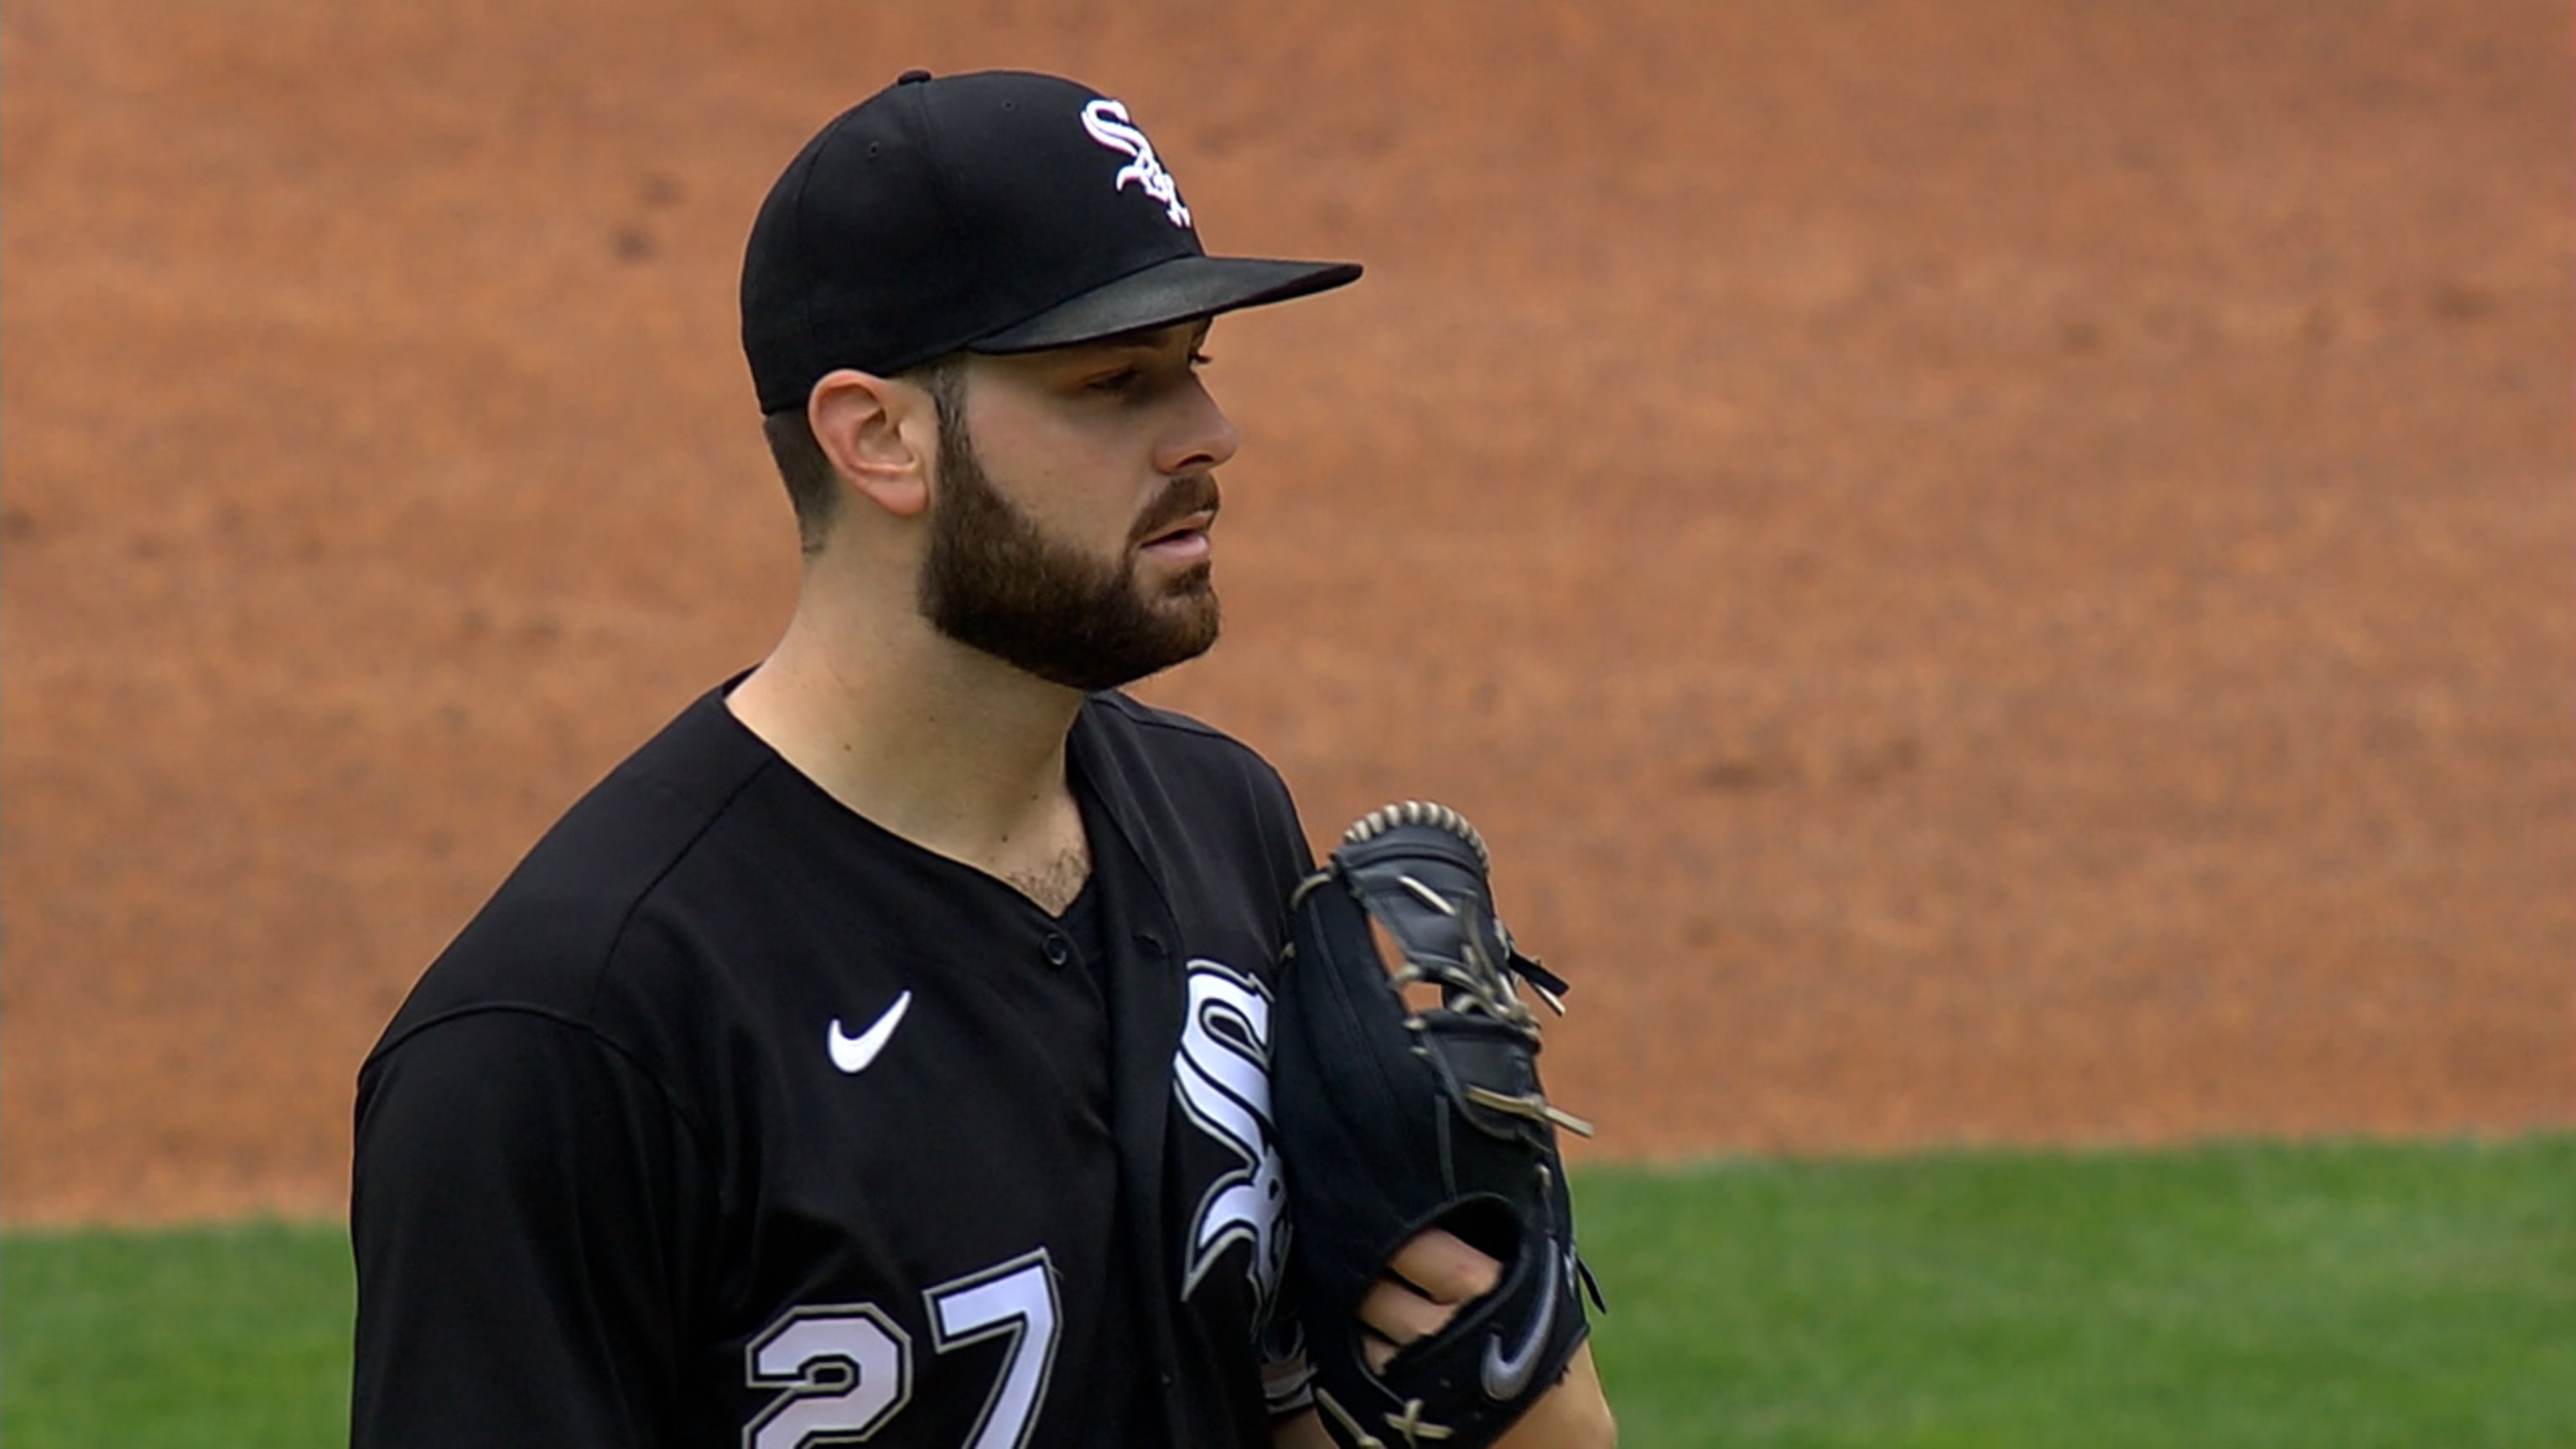 Lucas Giolito and Jack Flaherty, ex-high school aces, go head-to-head